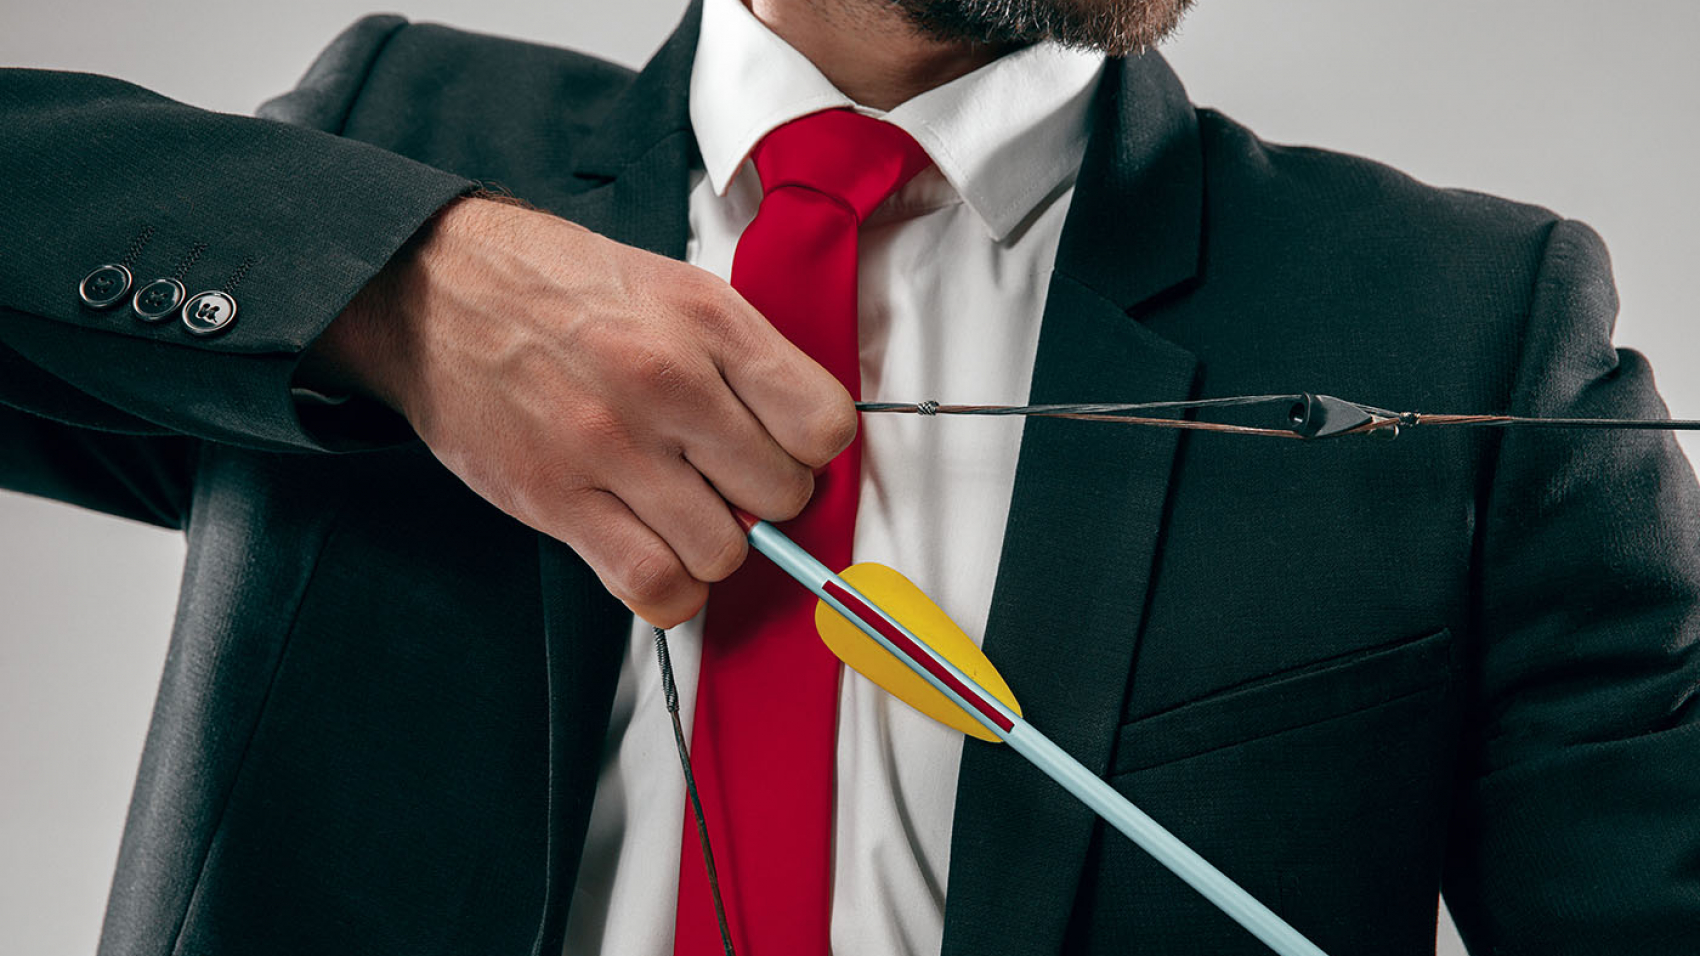 Businessman aiming at target with bow and arrow isolated on gray studio background. The business, goal, challenge, competition, achievement, purpose, victory, win, clarity, winner and success concept